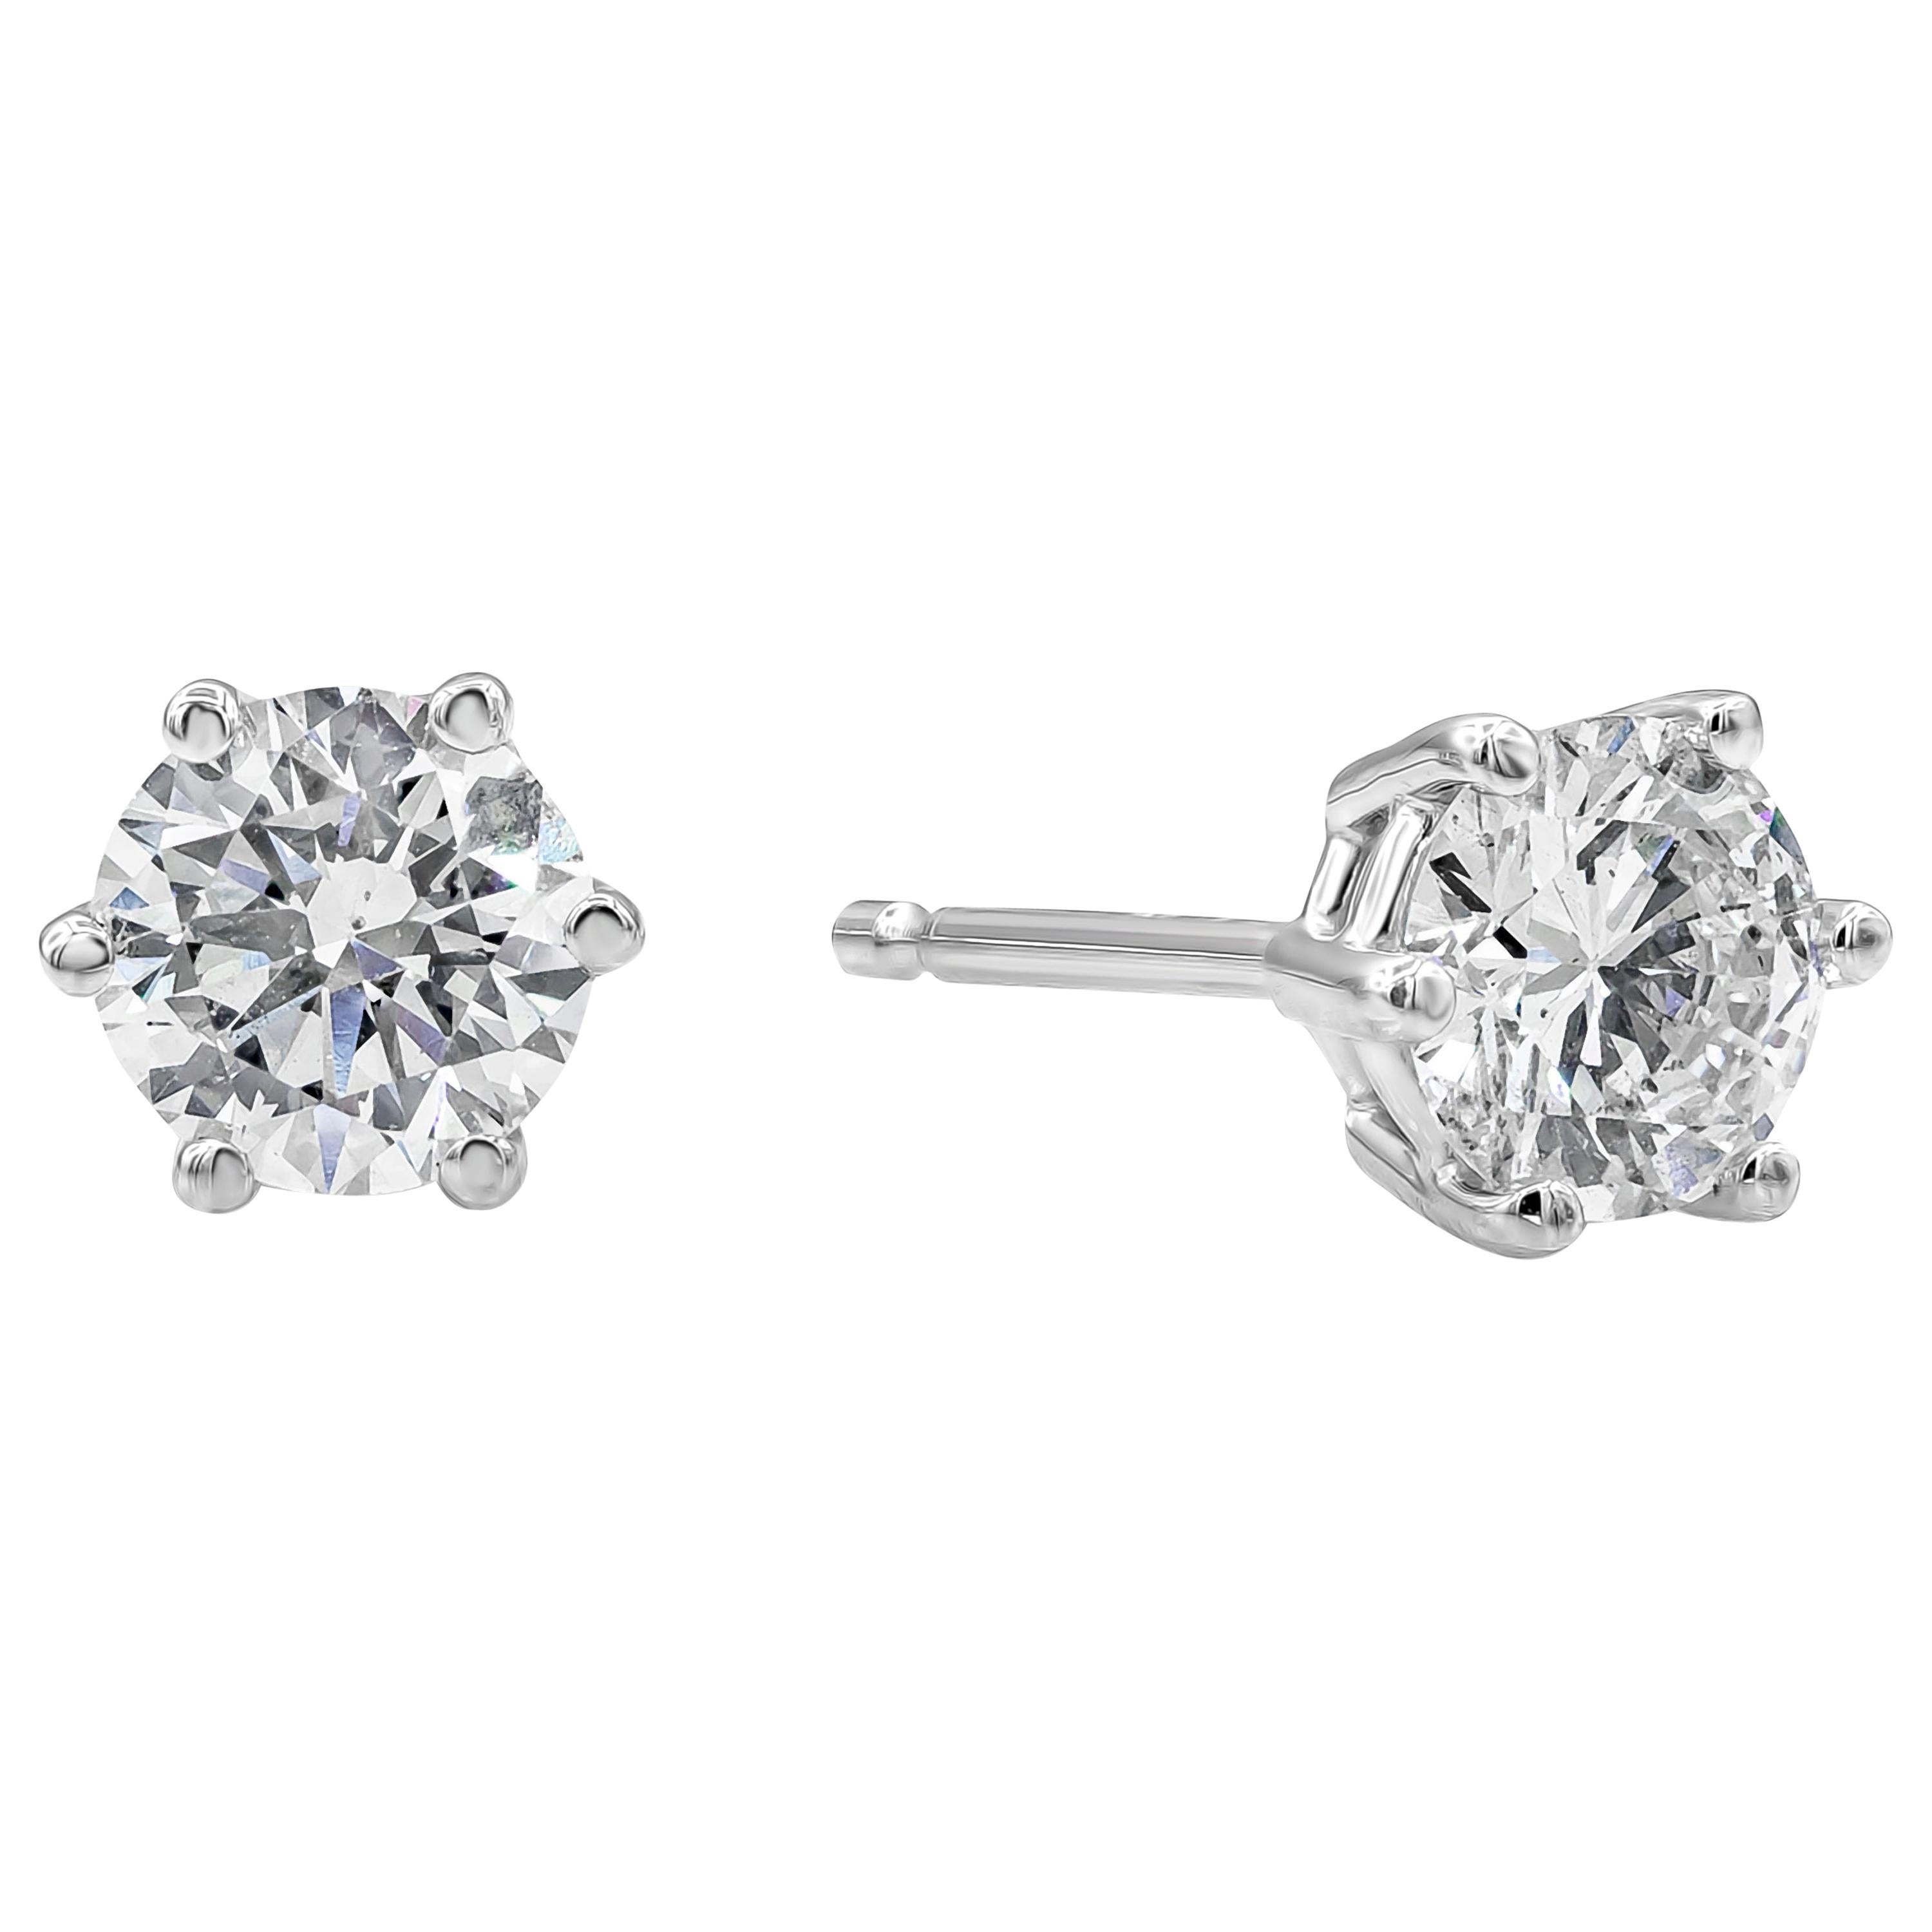 A timeless stud earring design to compliment any style. Showcasing 2 round brilliant diamonds weighing 0.75 carats total F Color and Si2 in Clarity. Set in a classic six  prong basket setting, Finely made in 14K White Gold.

Style available in